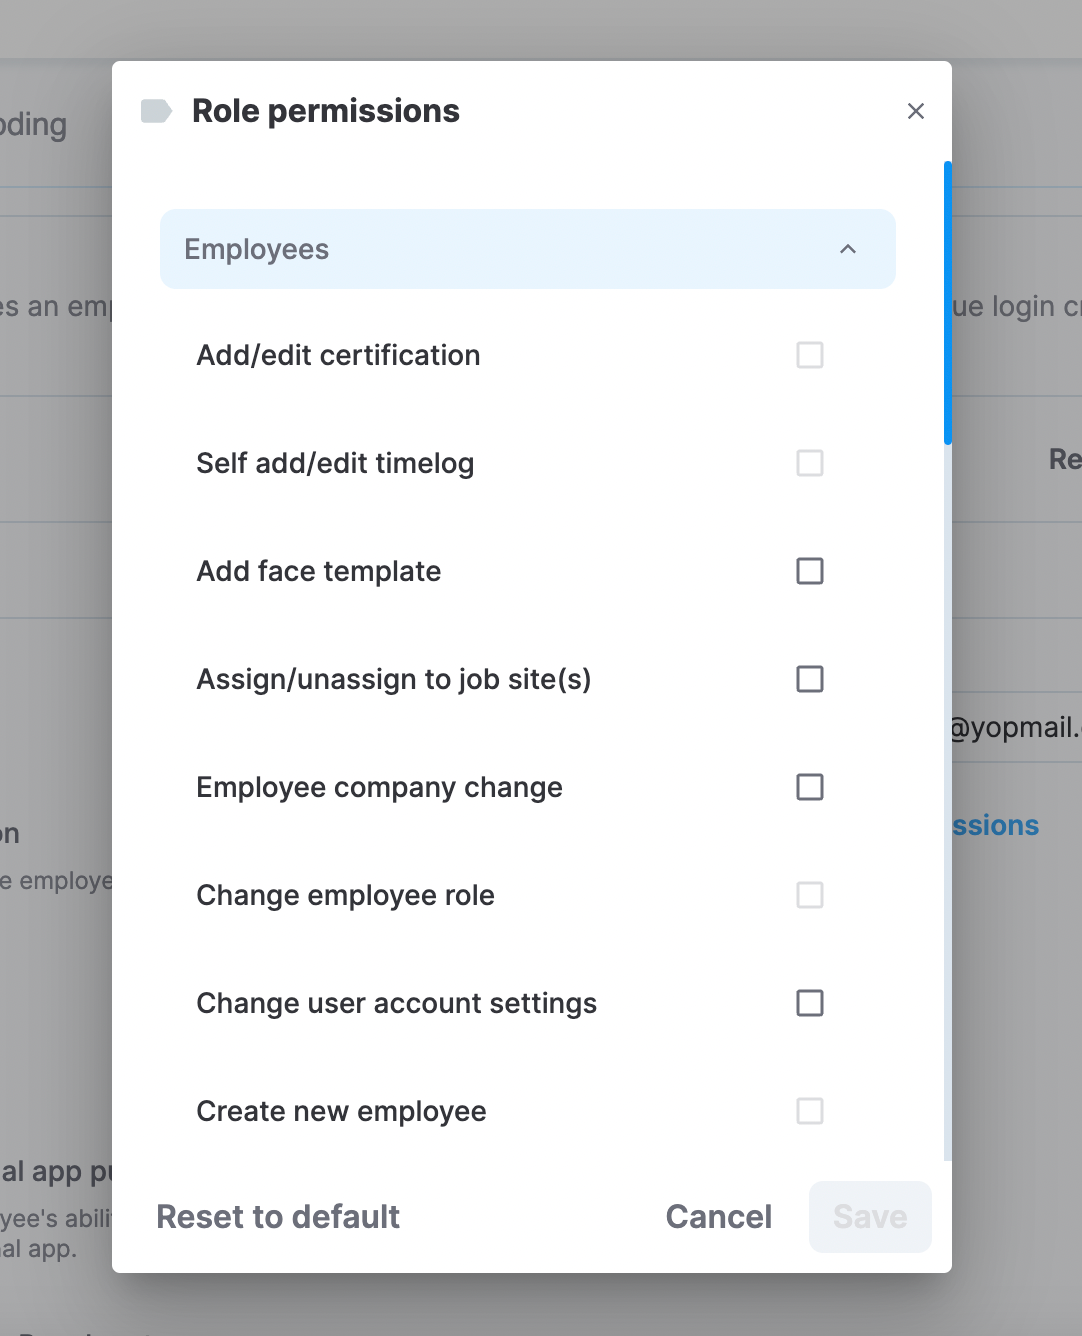 List of employee permissions